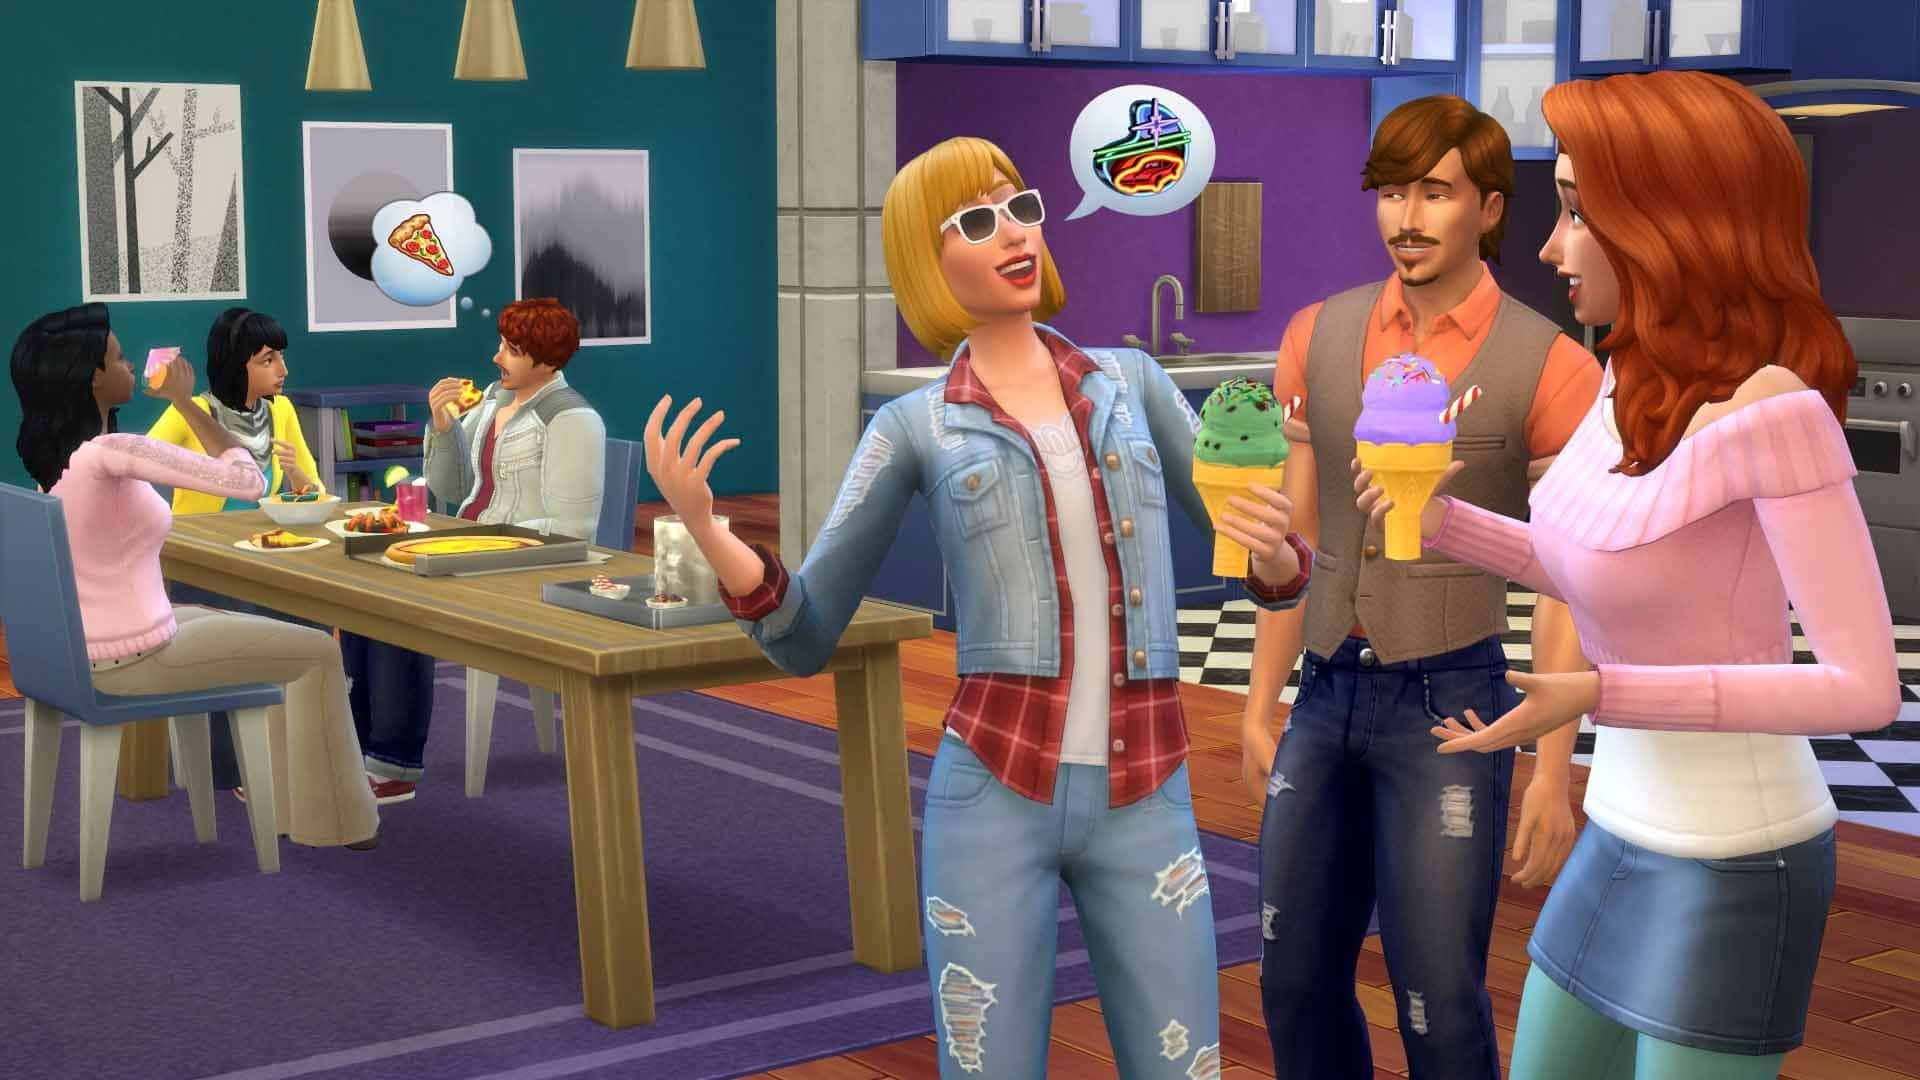 The Sims 4 Cheats Codes Guide (Money, Promotion, Rewards) - SteamAH